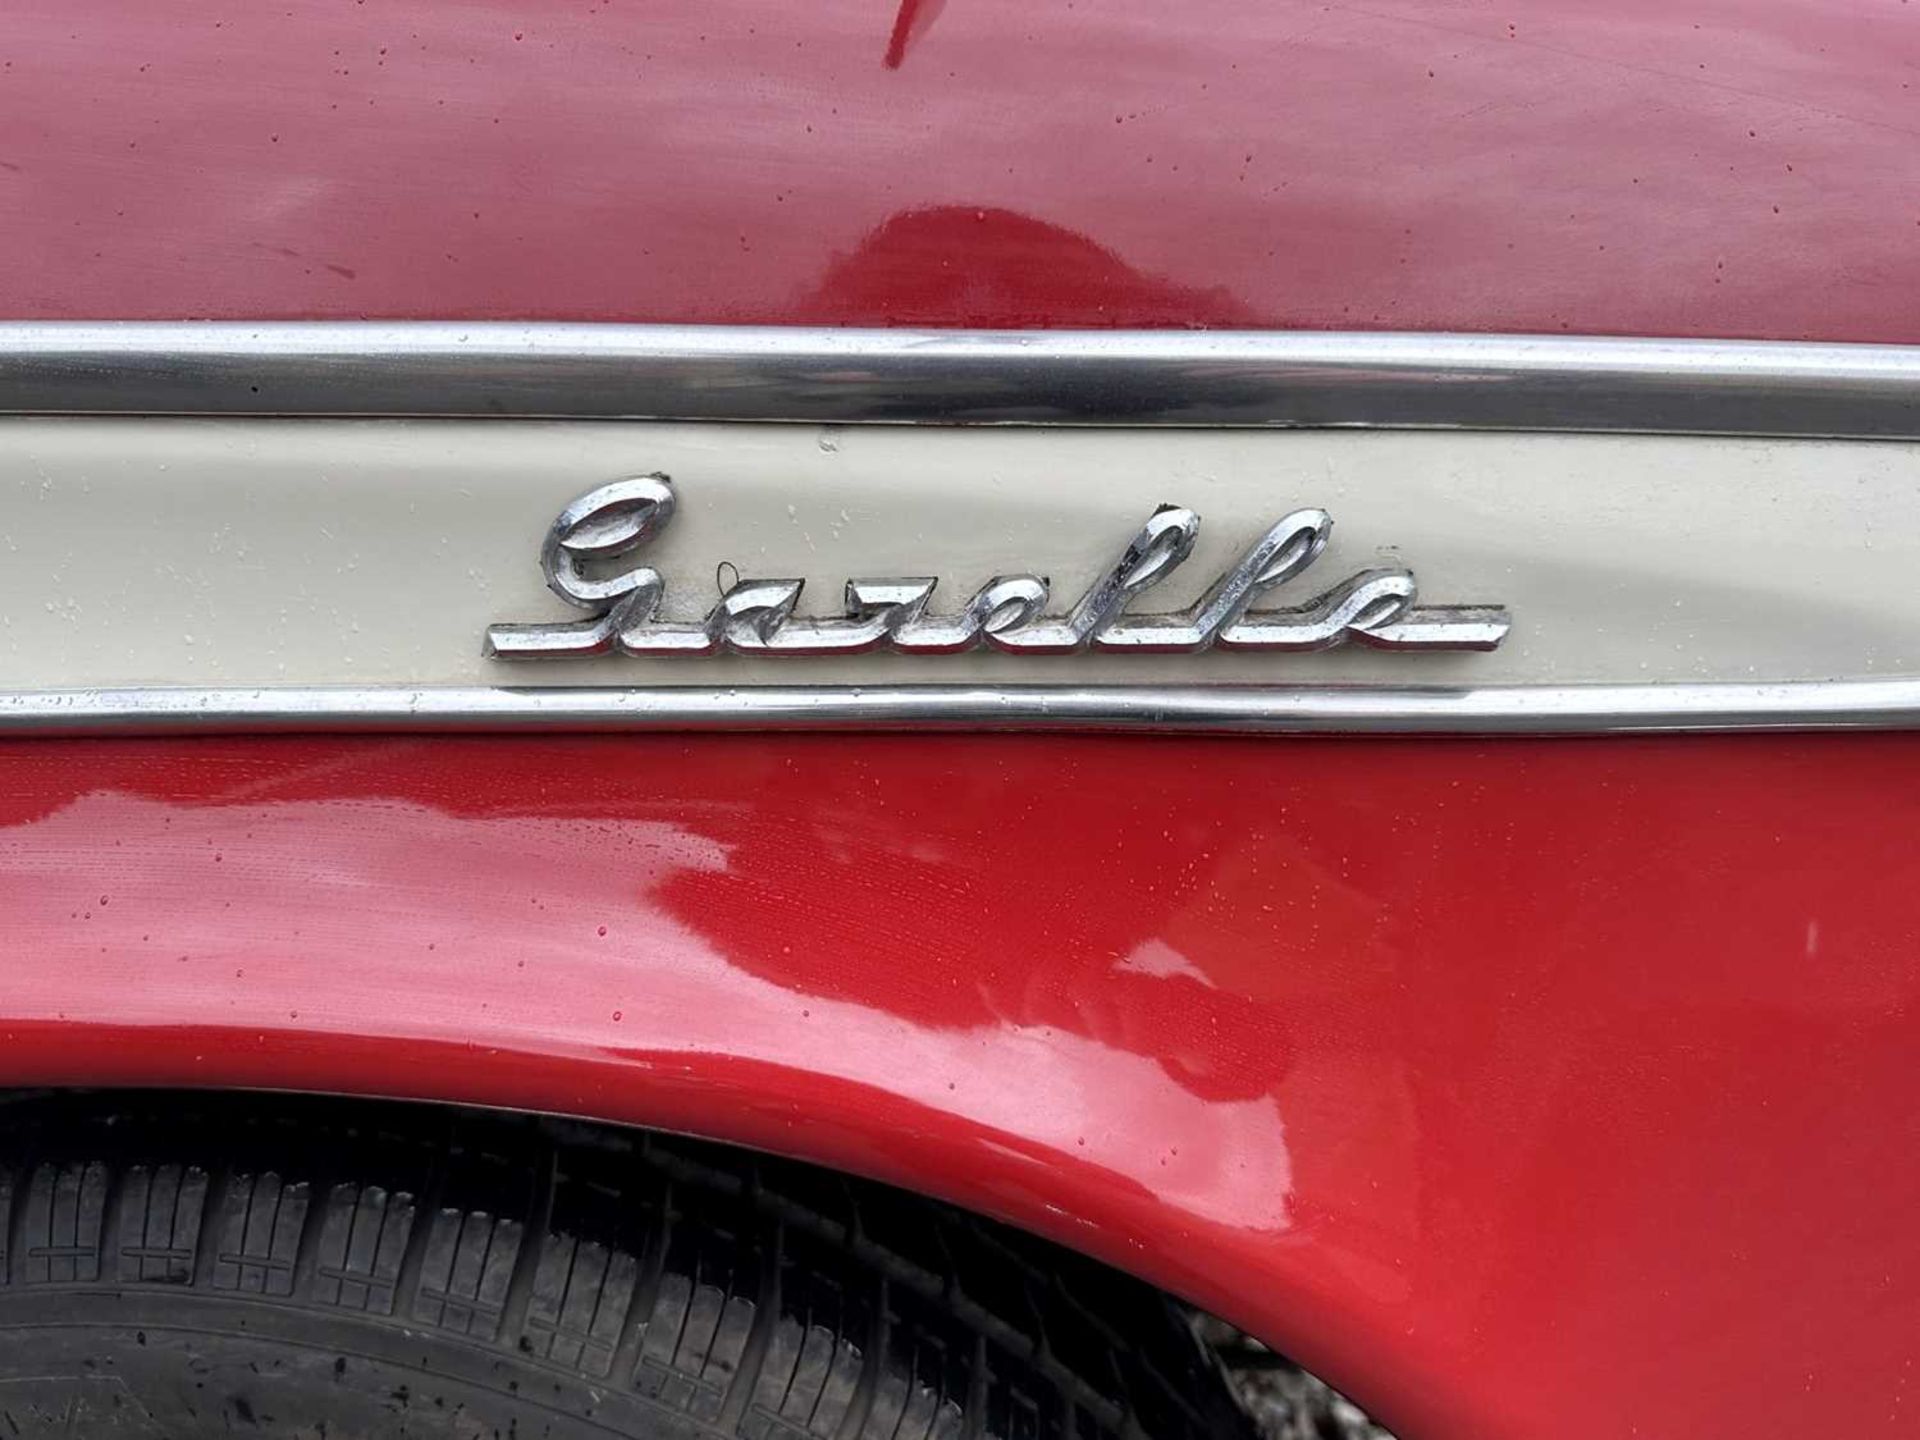 1961 Singer Gazelle Convertible Comes complete with overdrive, period radio and badge bar - Image 83 of 95